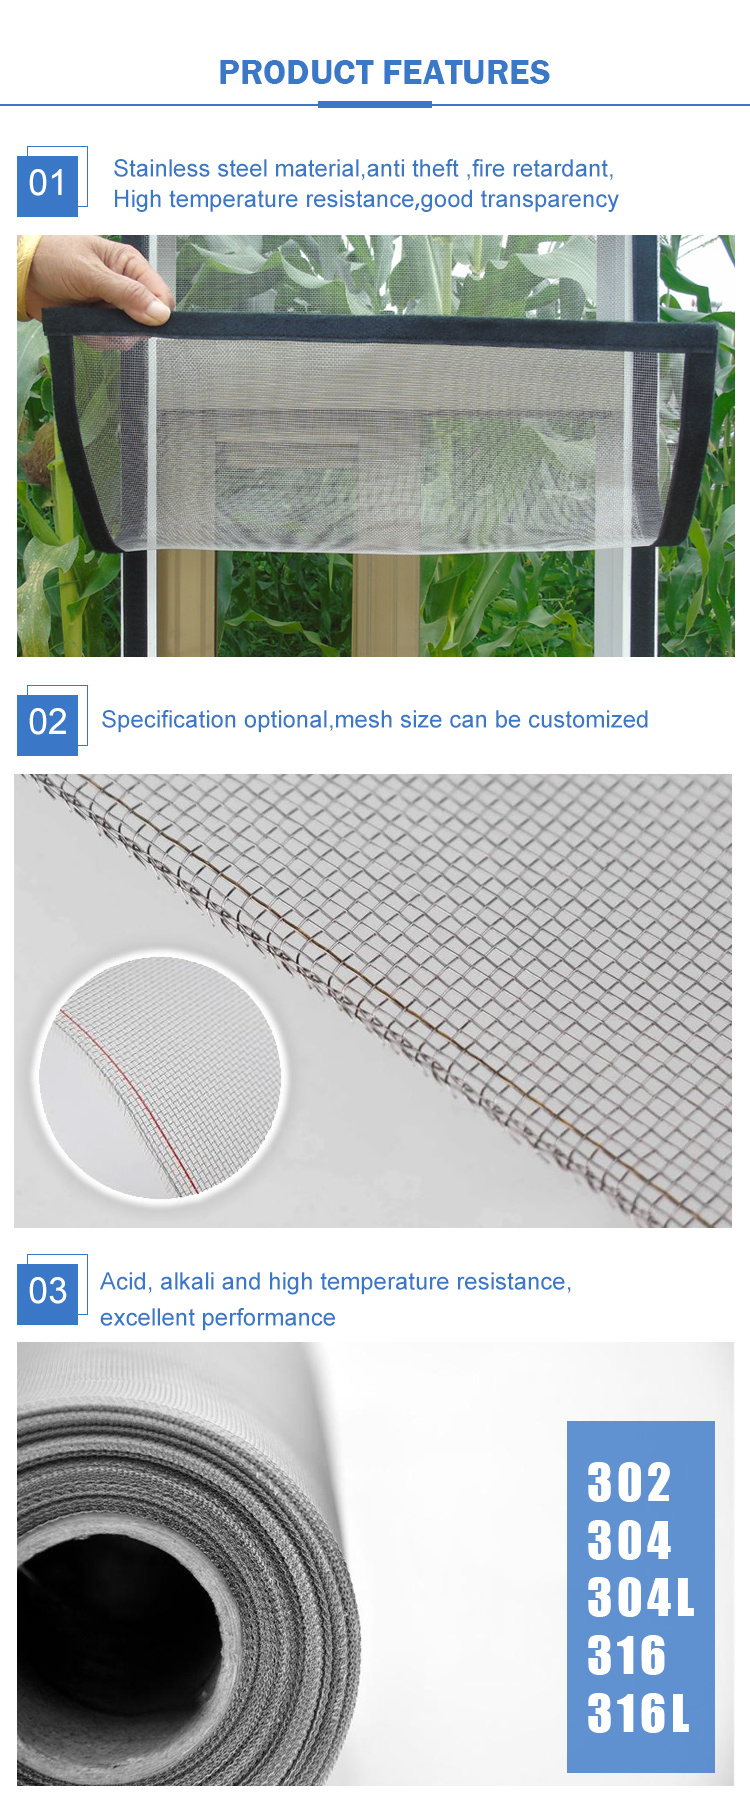 Customizable Stainless Steel Window Invisible Insect Screen